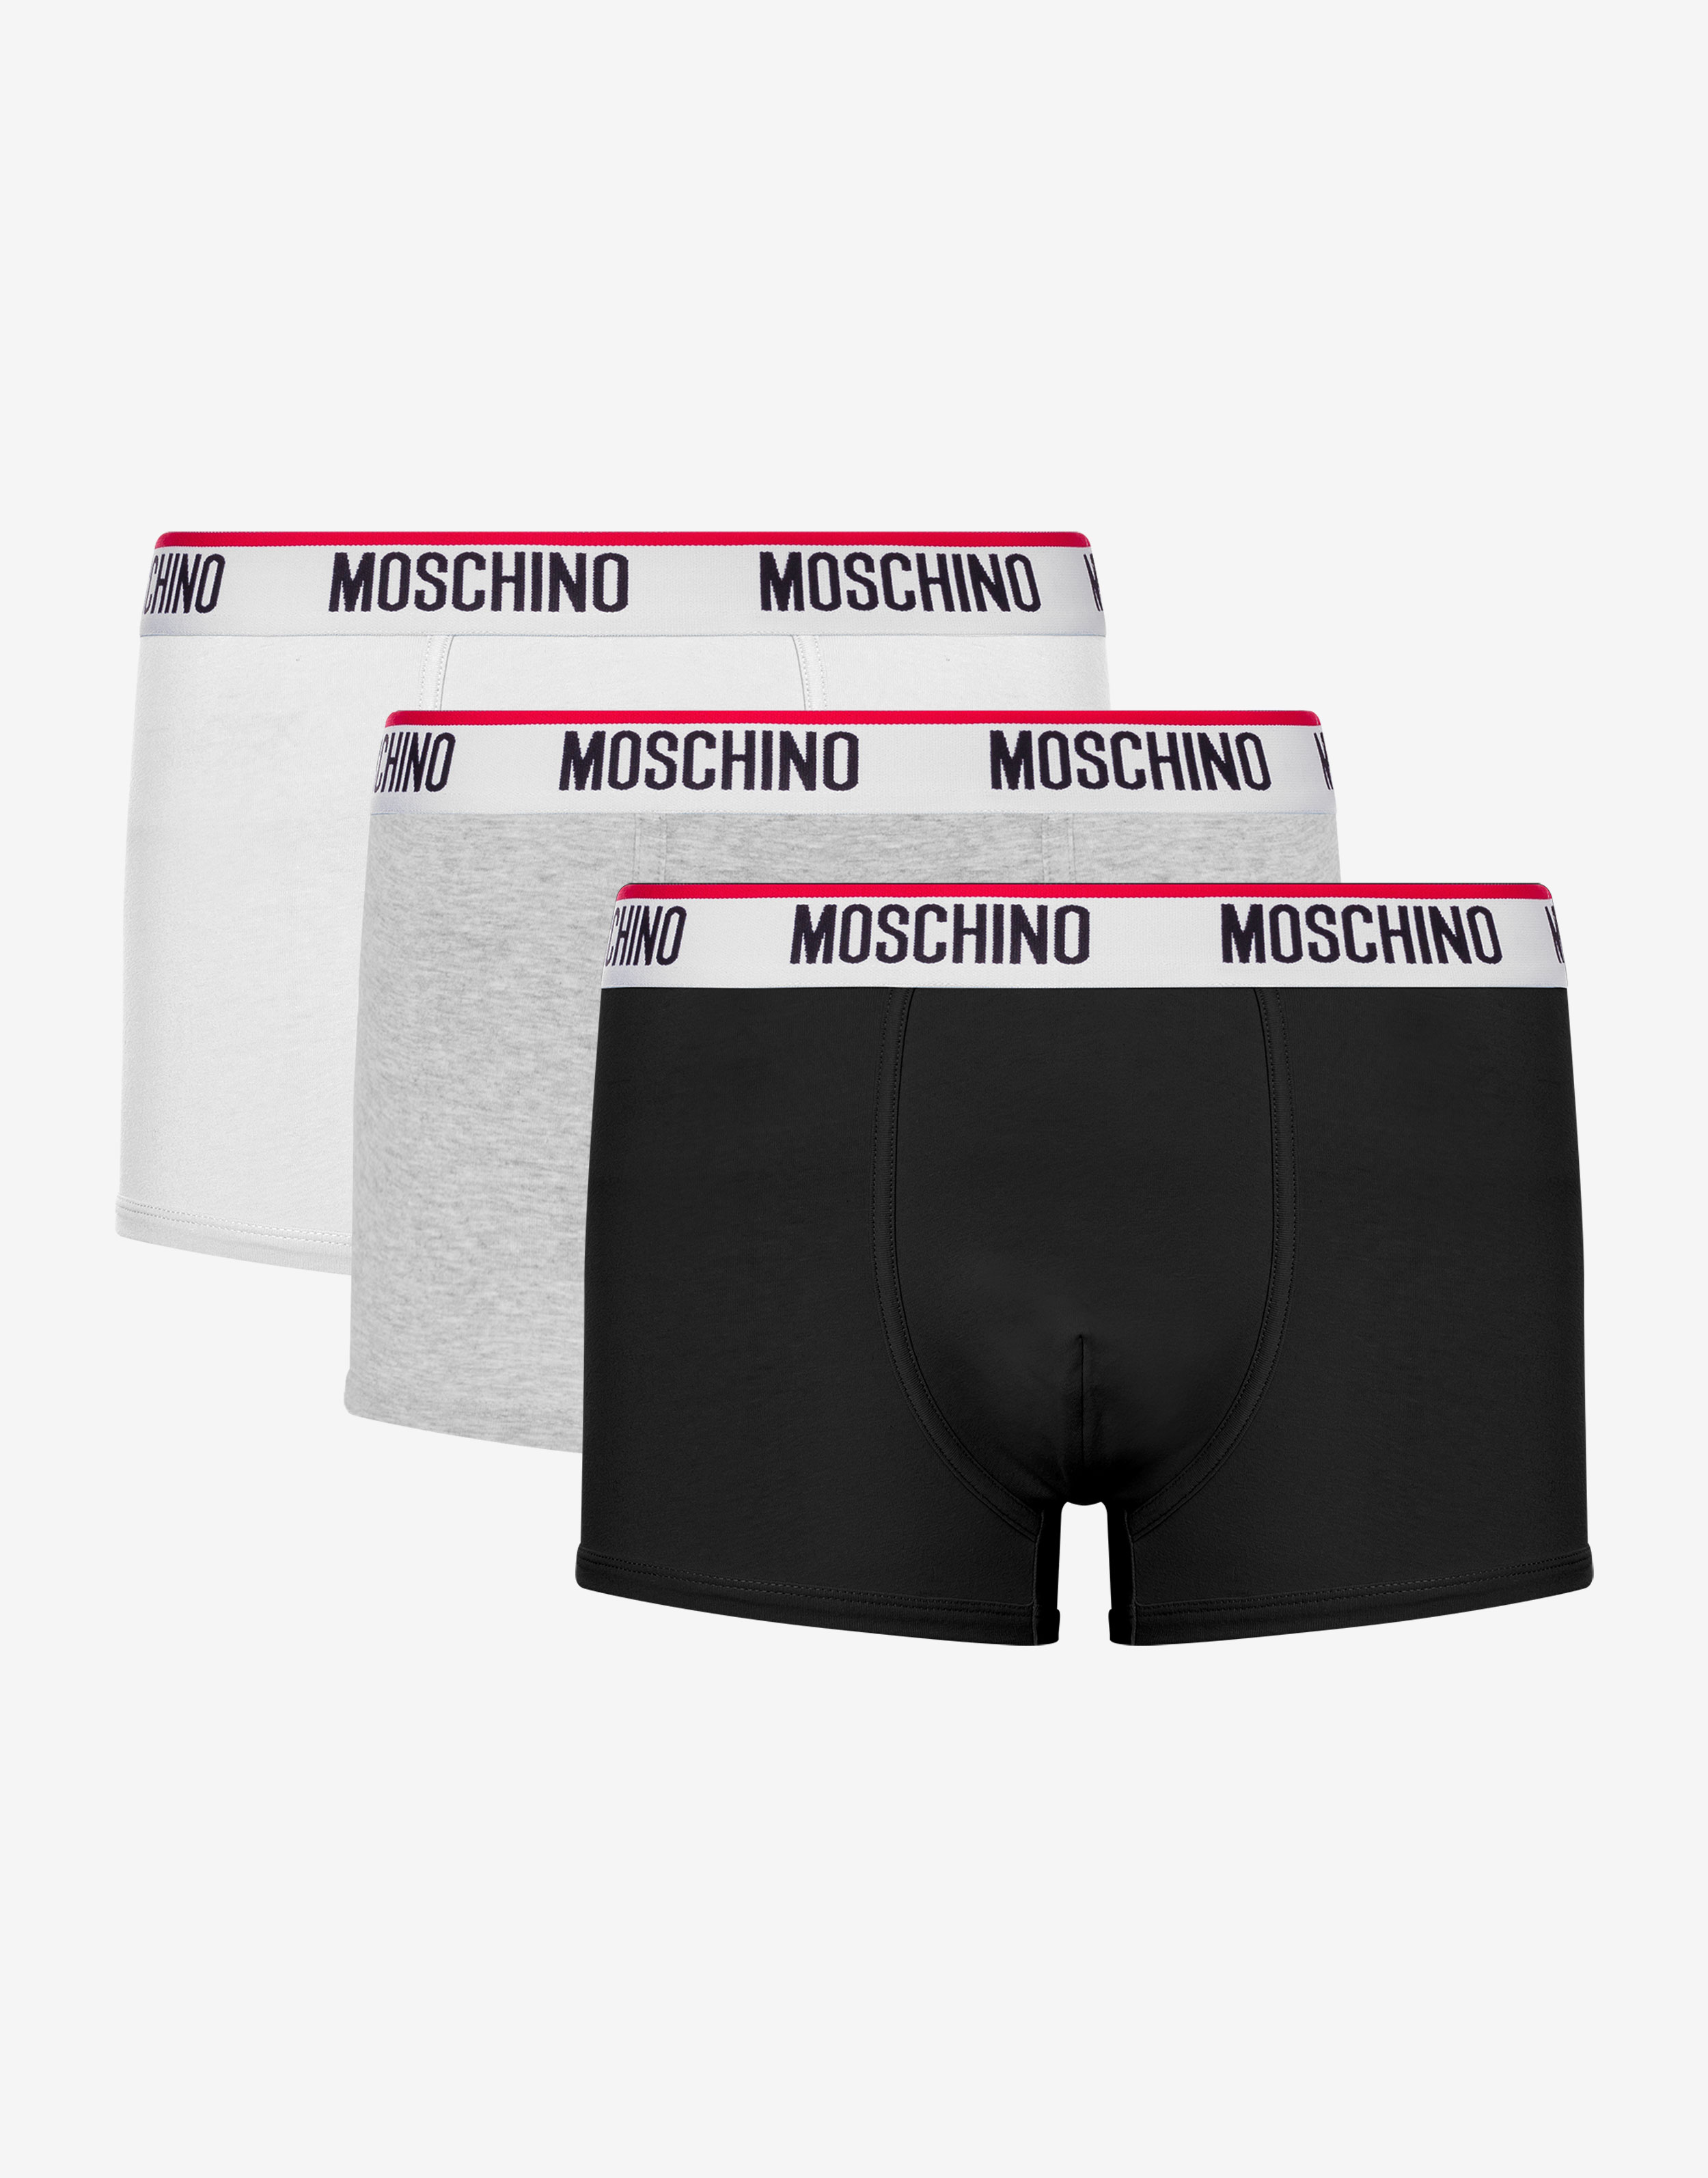 Moschino Underwear Lace Bustier and Panties entdecken